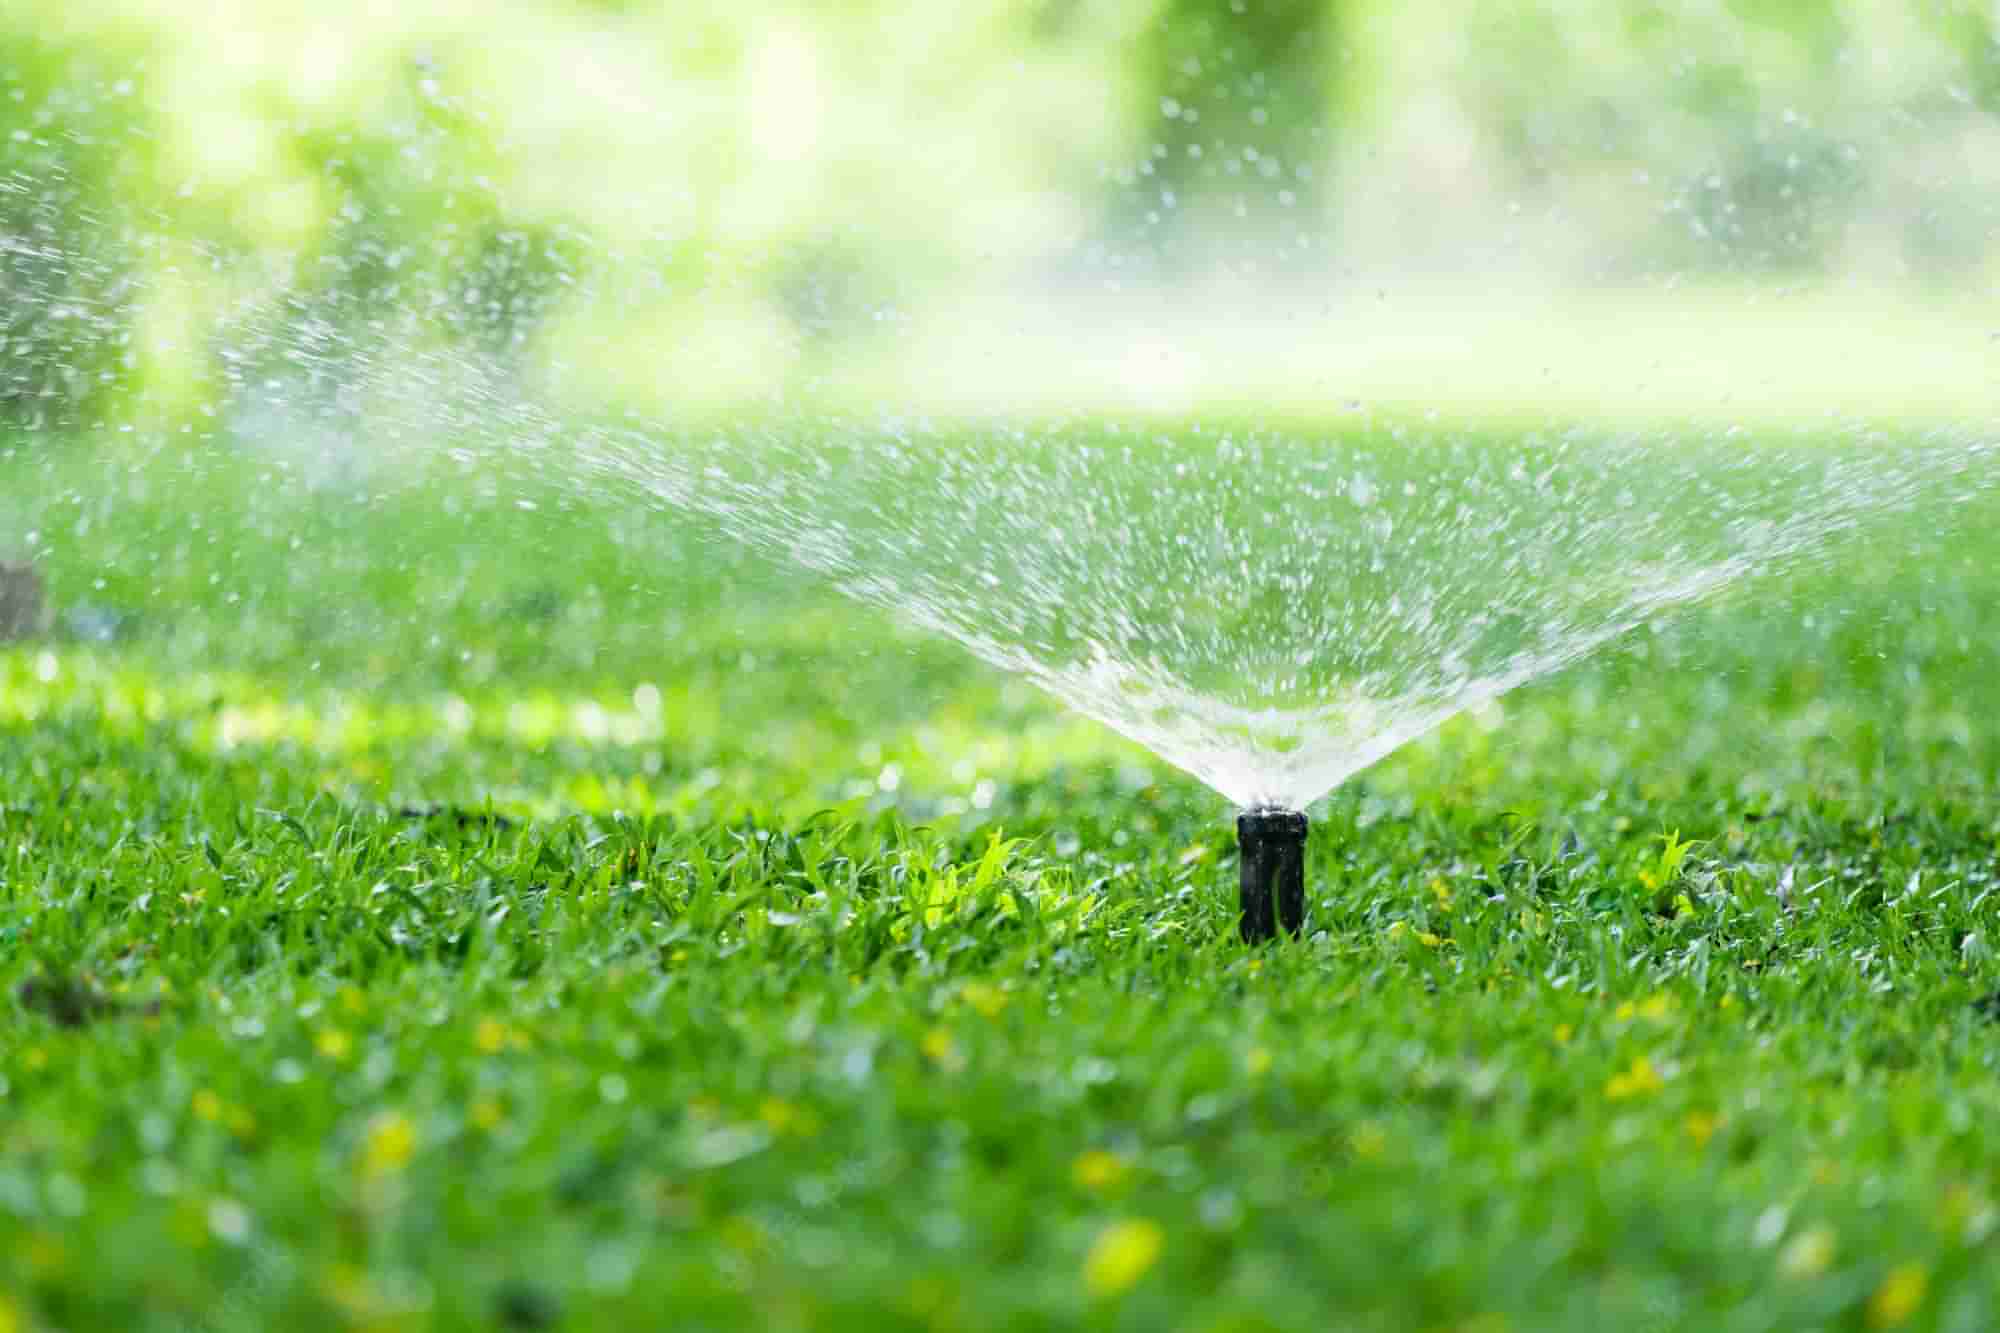 how to set up a water sprinkler